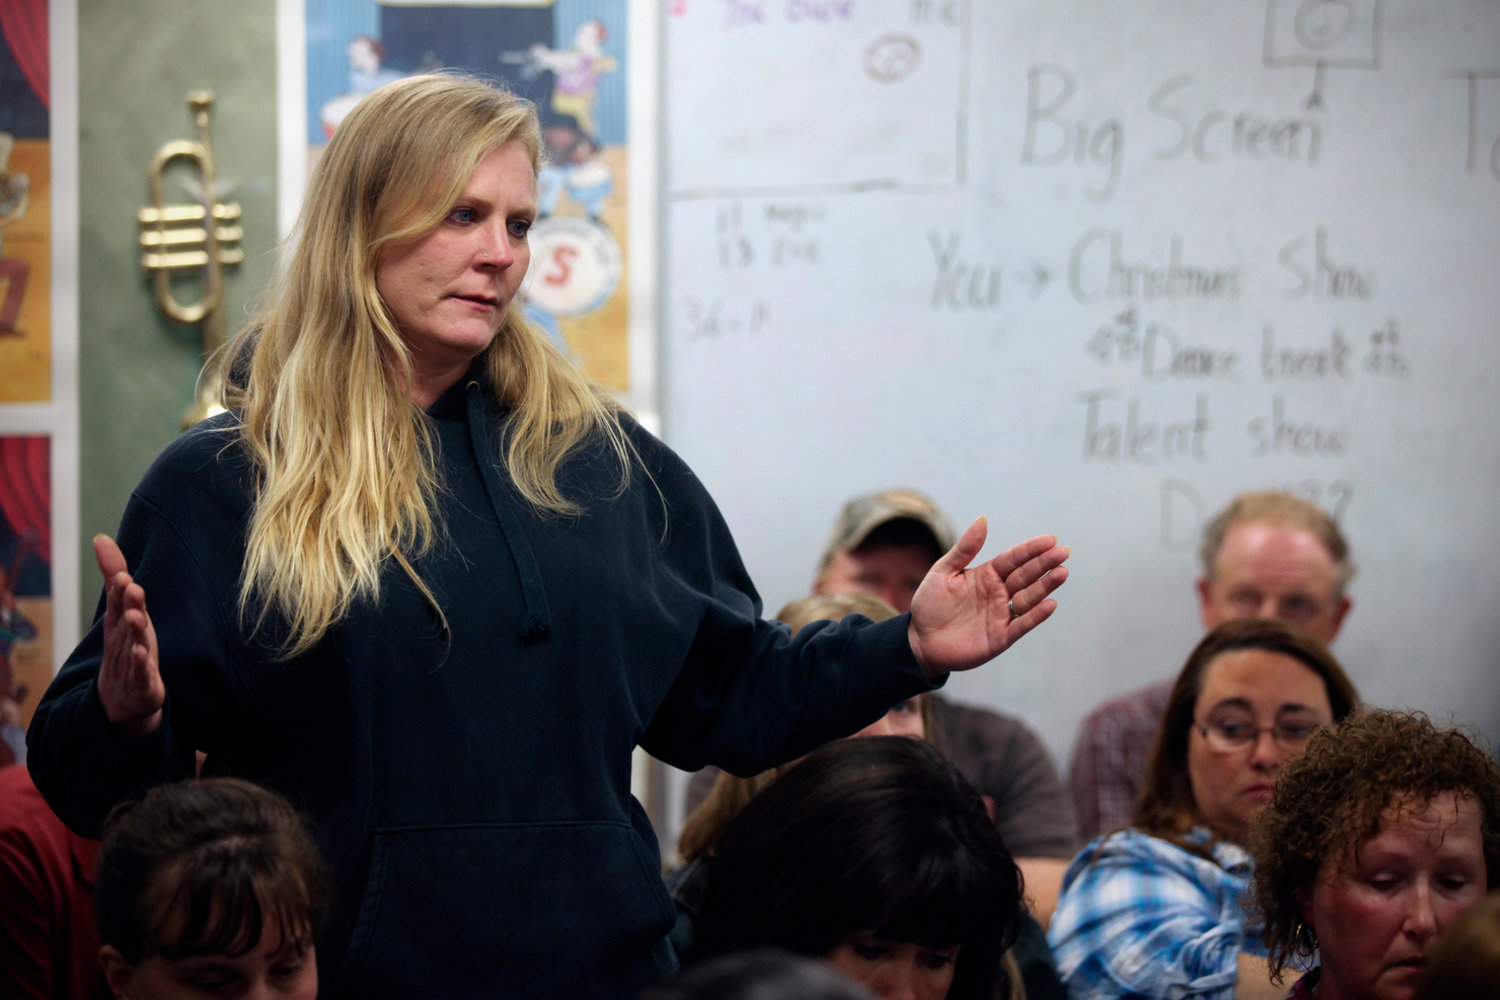 Beth Corder, who has a daughter in the Onalaska Elementary fifth grade class at the center of a sex education controversy, voices her concern during a meeting of the Onalaska School Board Monday evening.